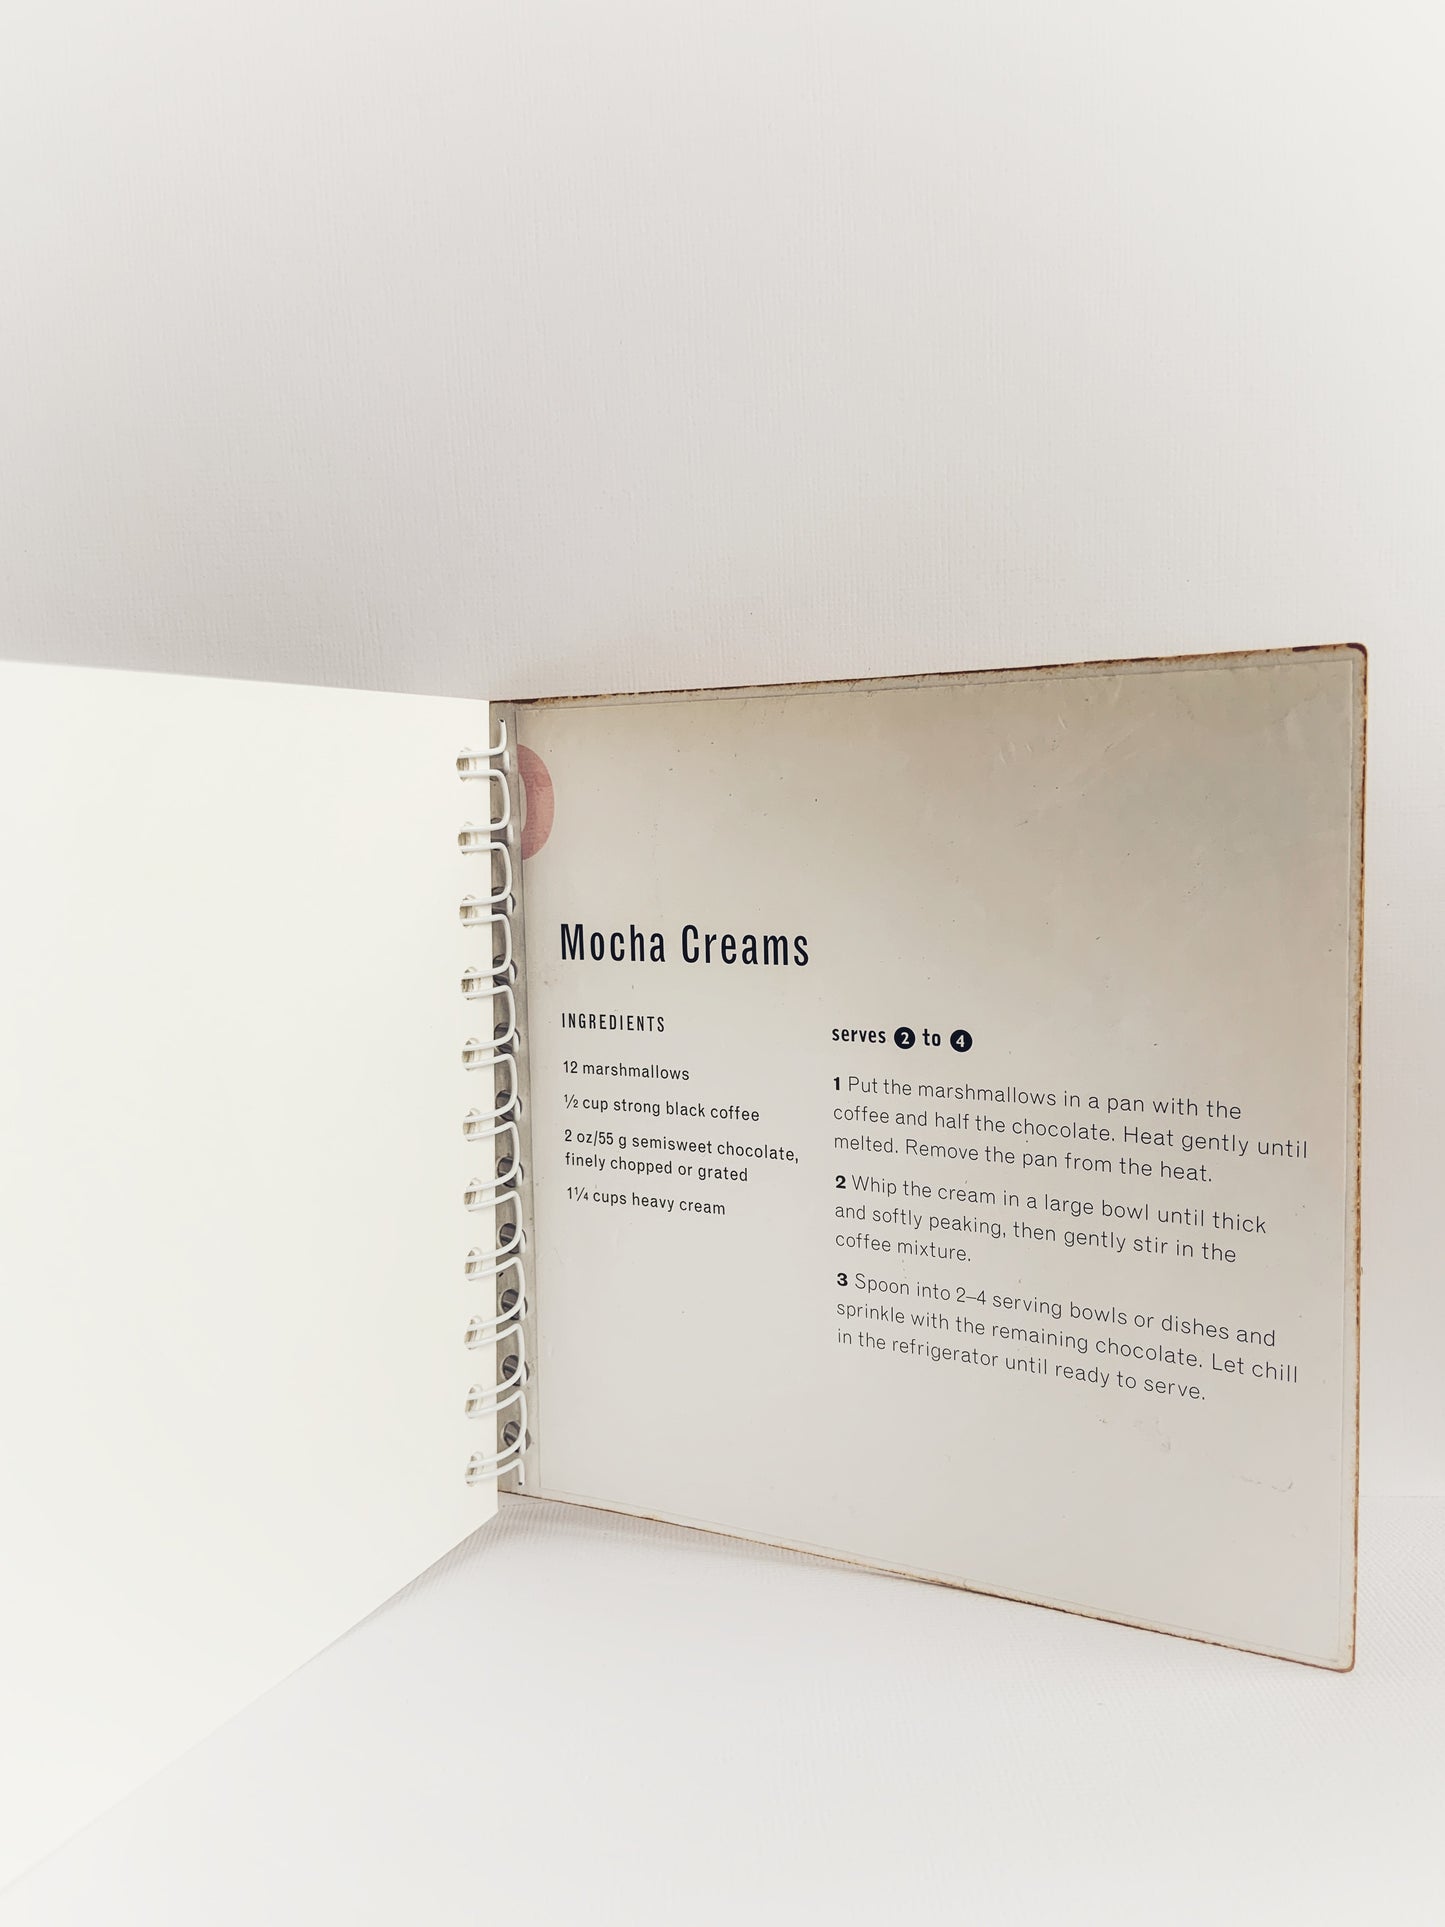 Inside back cover of a handmade journal showing recipe for Mocha Creams.